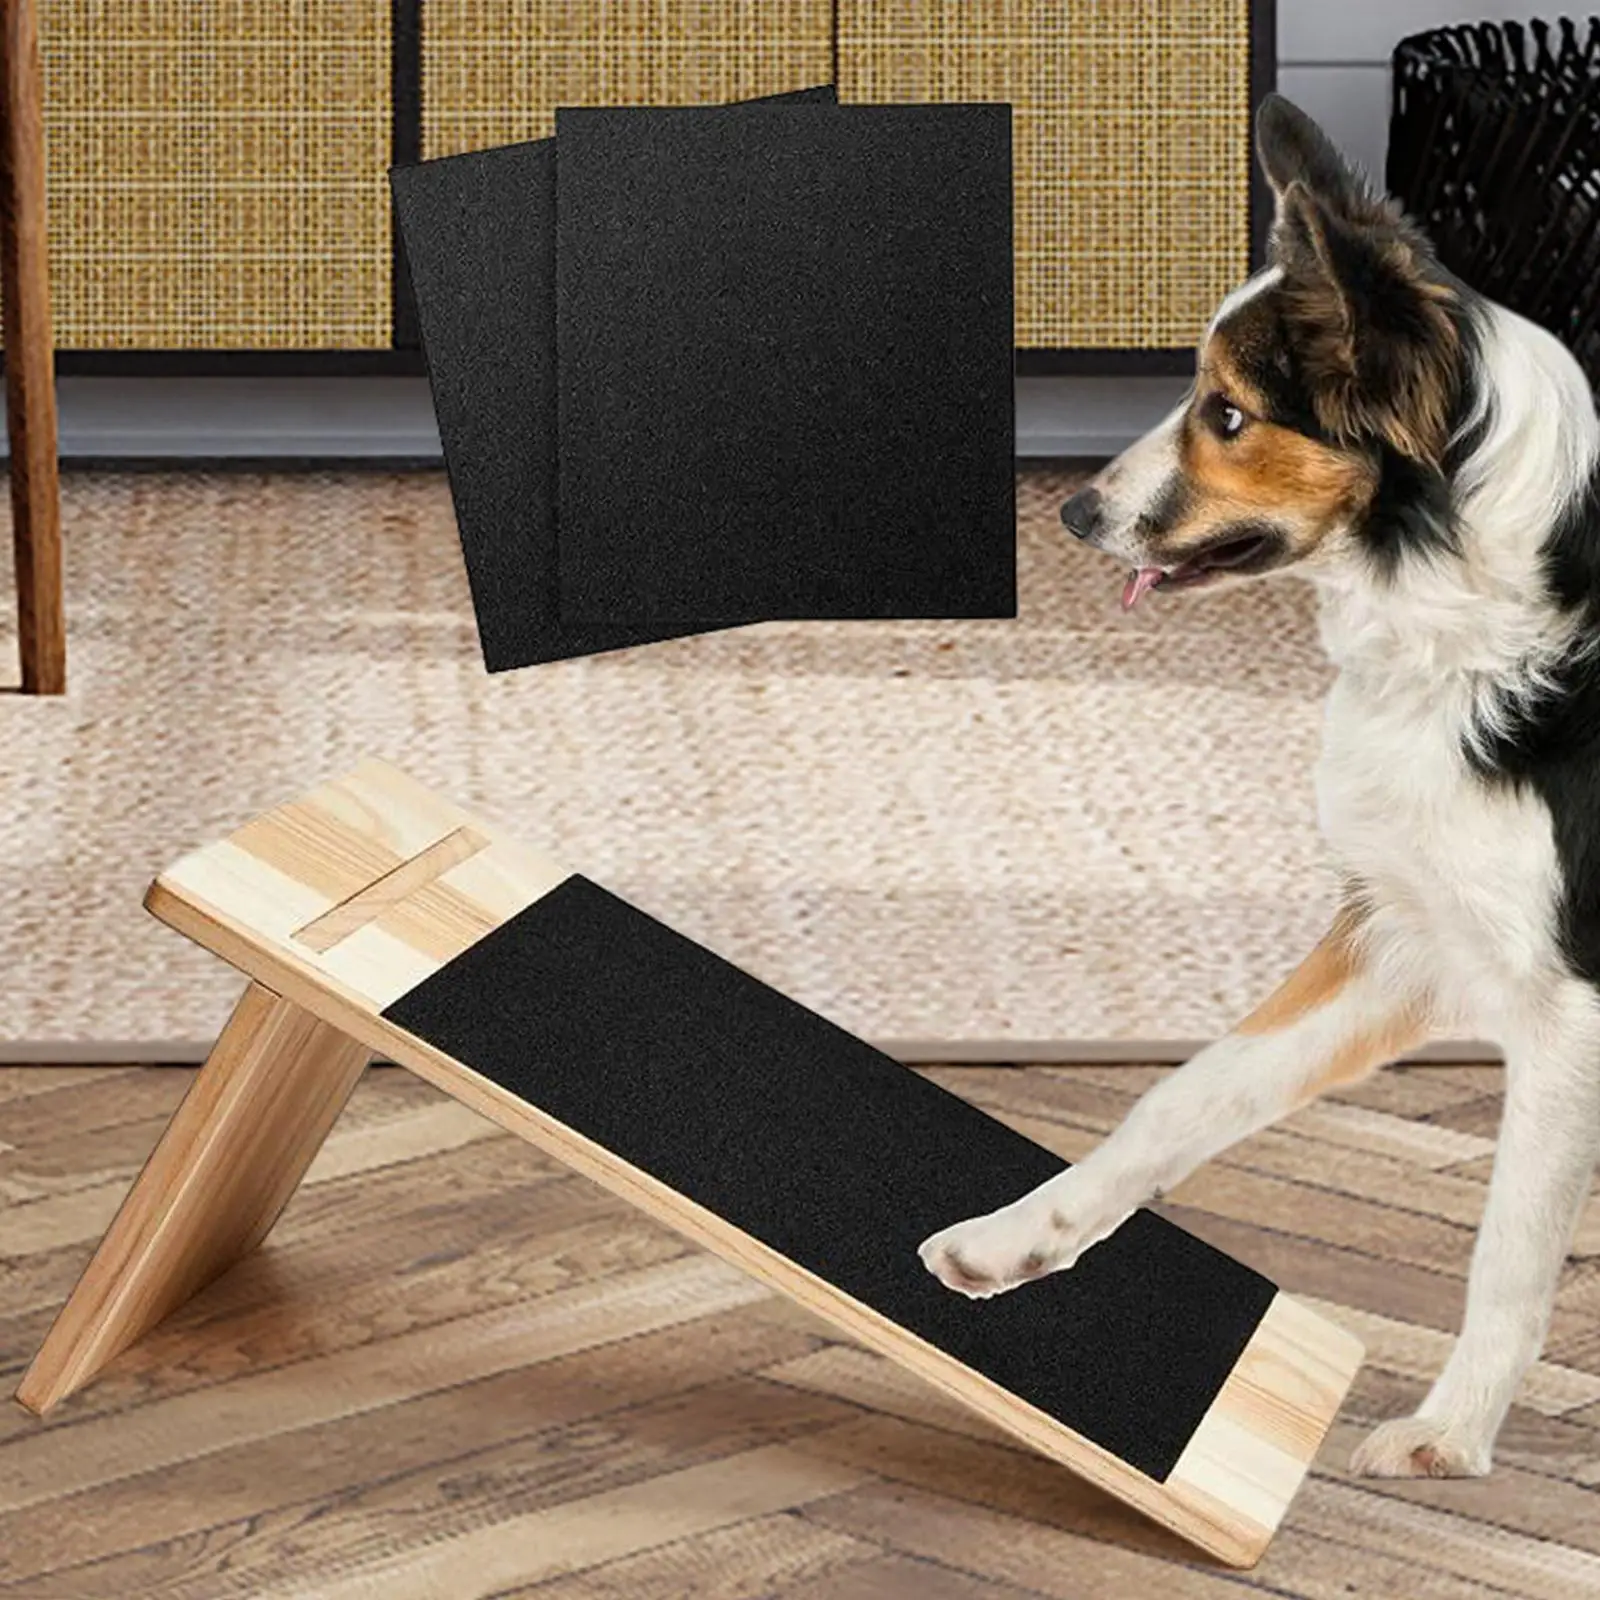 Dog Scratch Pad for Nails Toy Furniture Protection for Medium and Large Dogs